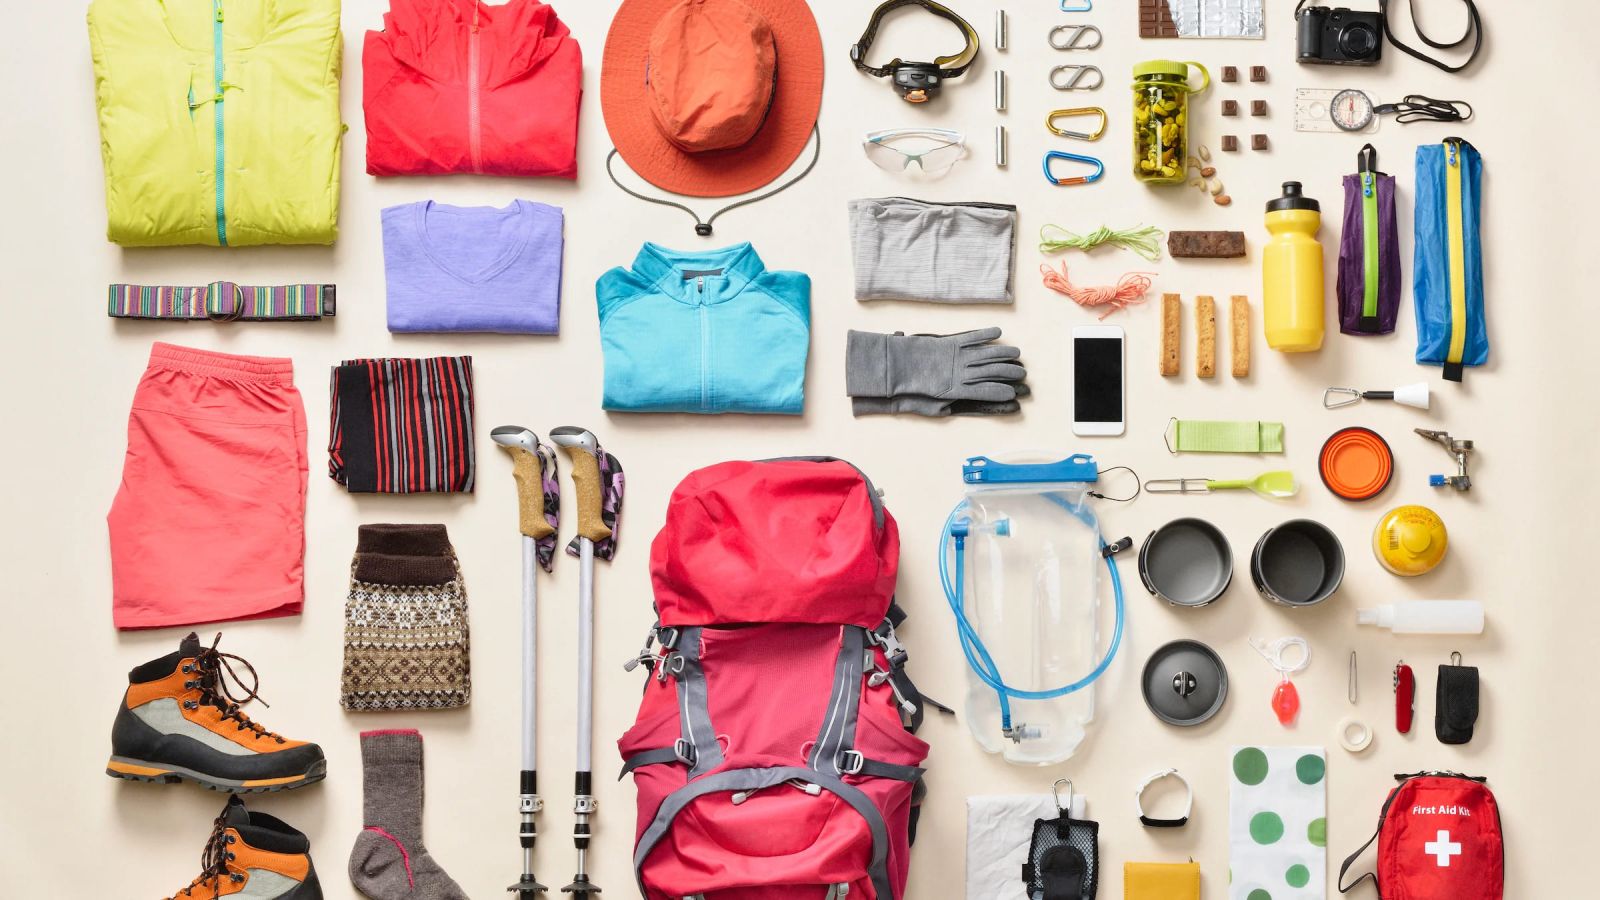 clothes, items necessary for hiking with a backpack